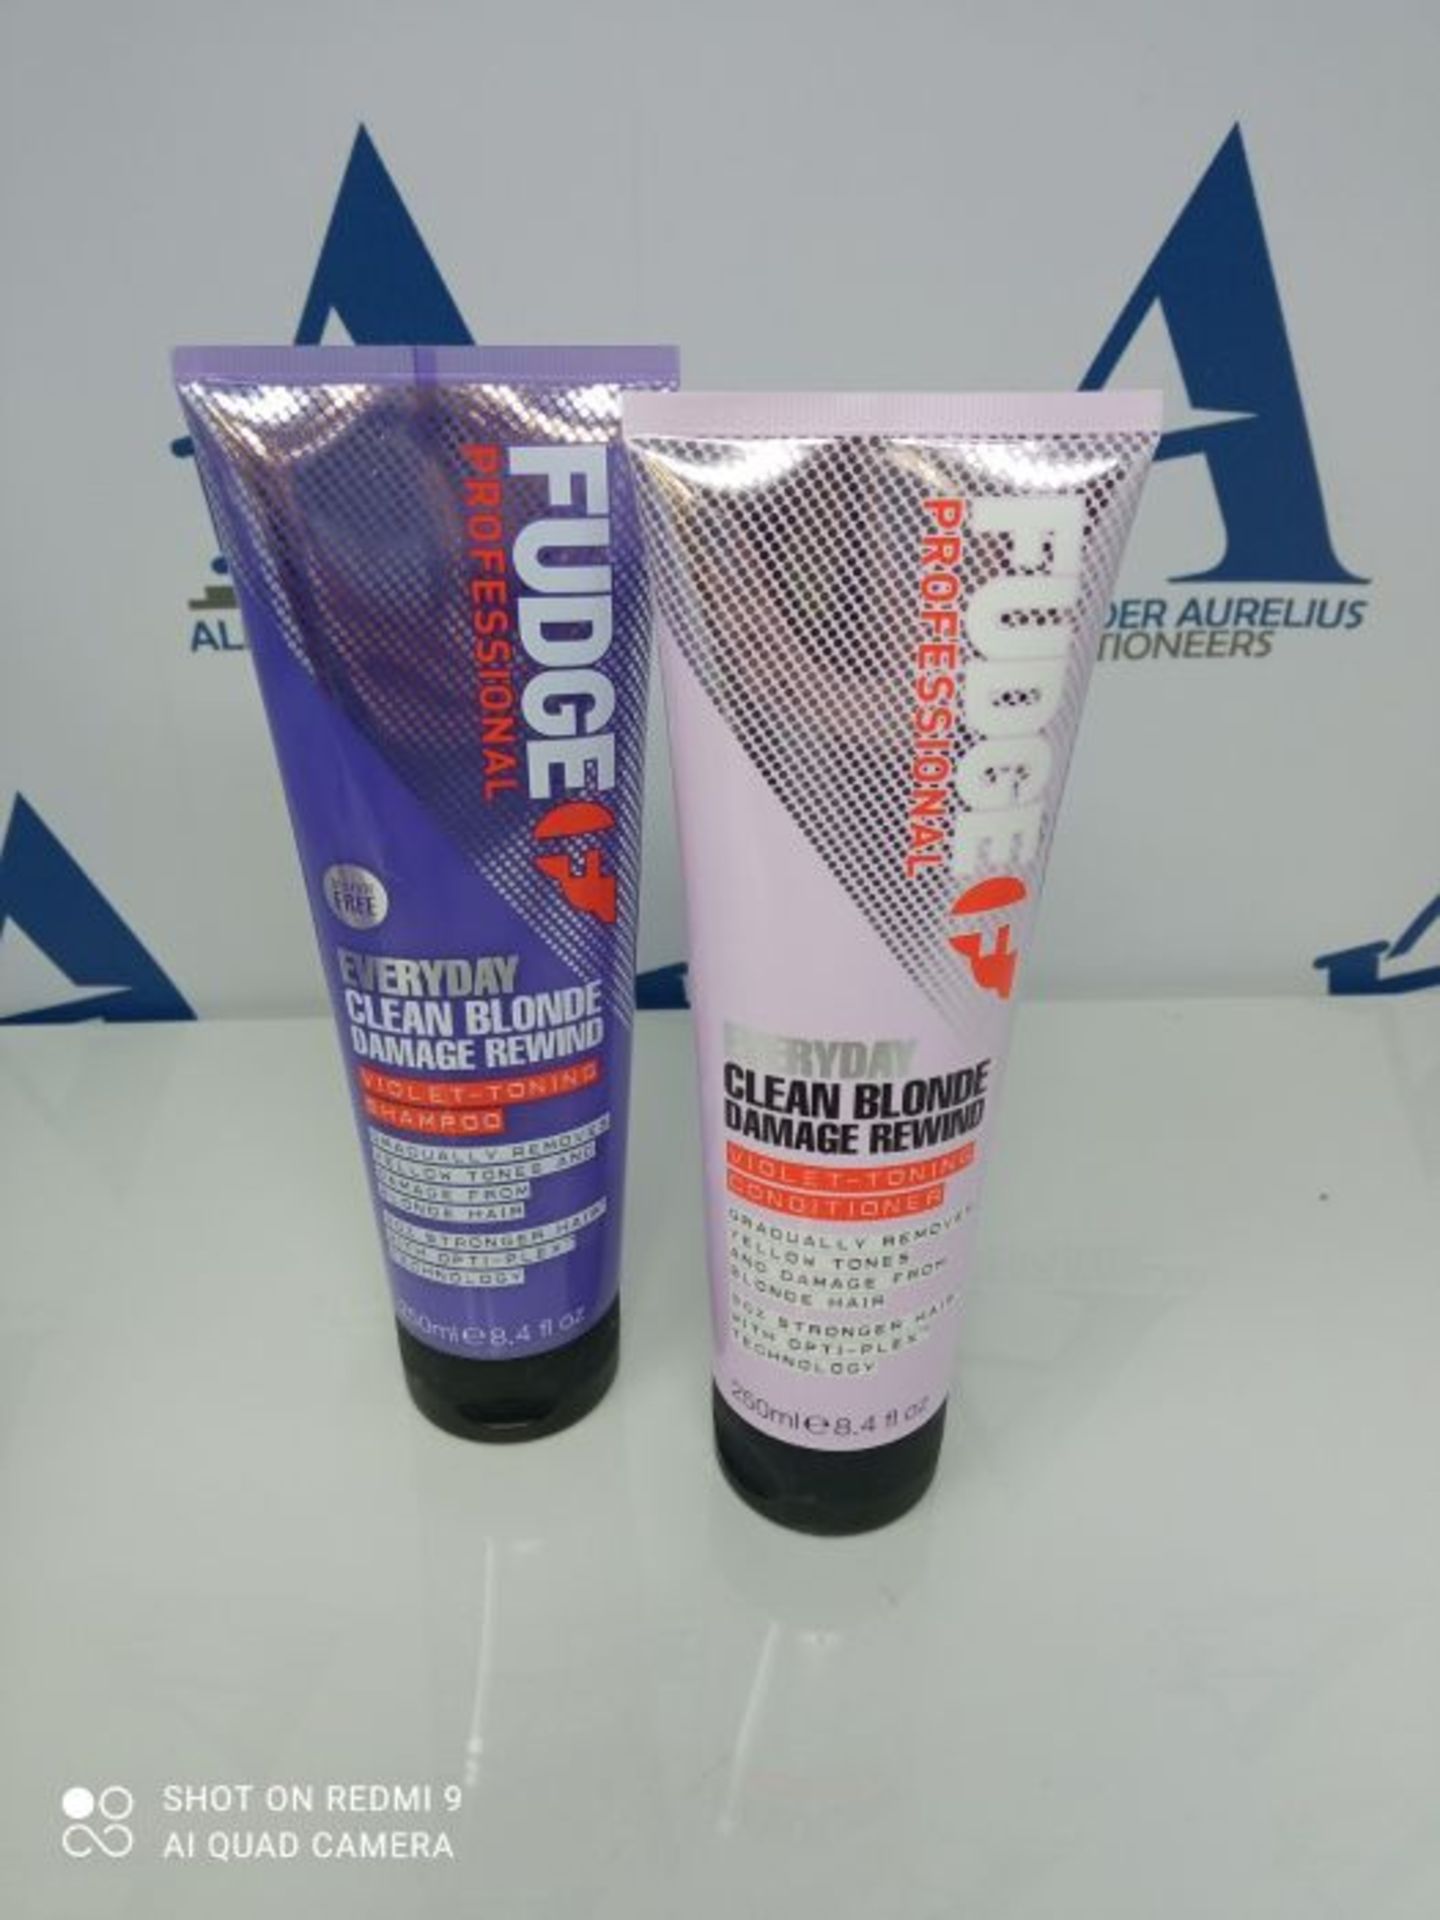 Duo Sets by Fudge Clean Blonde Damage Rewind Violet-Toning Shampoo & Conditioner Duo 2 - Image 3 of 3